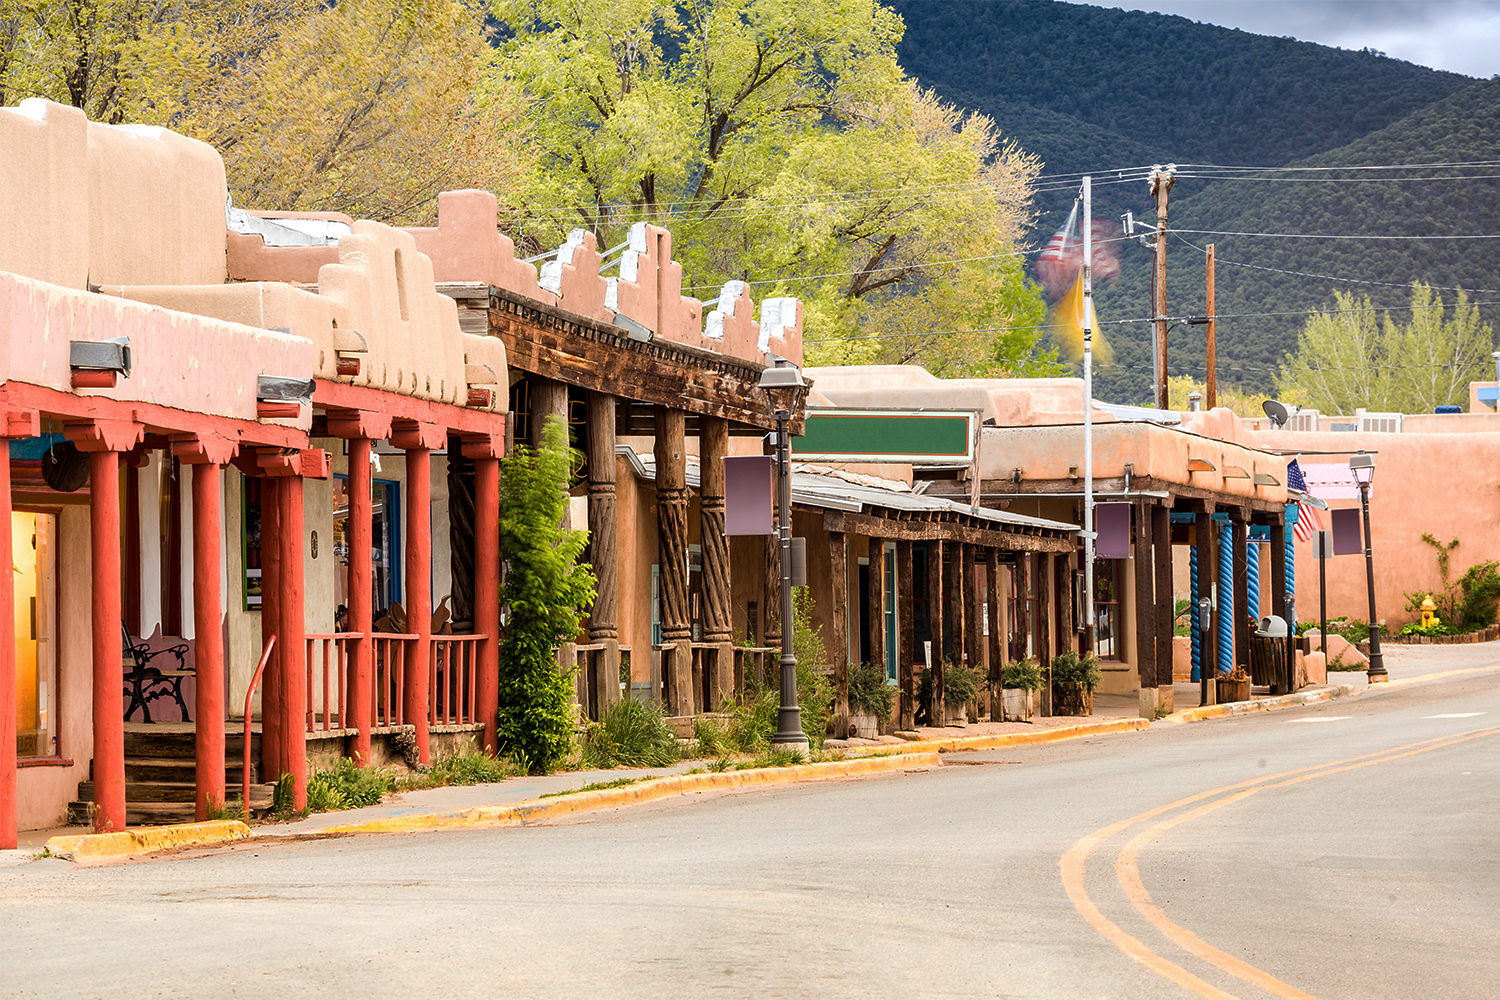 A street in Taos, New Mexico